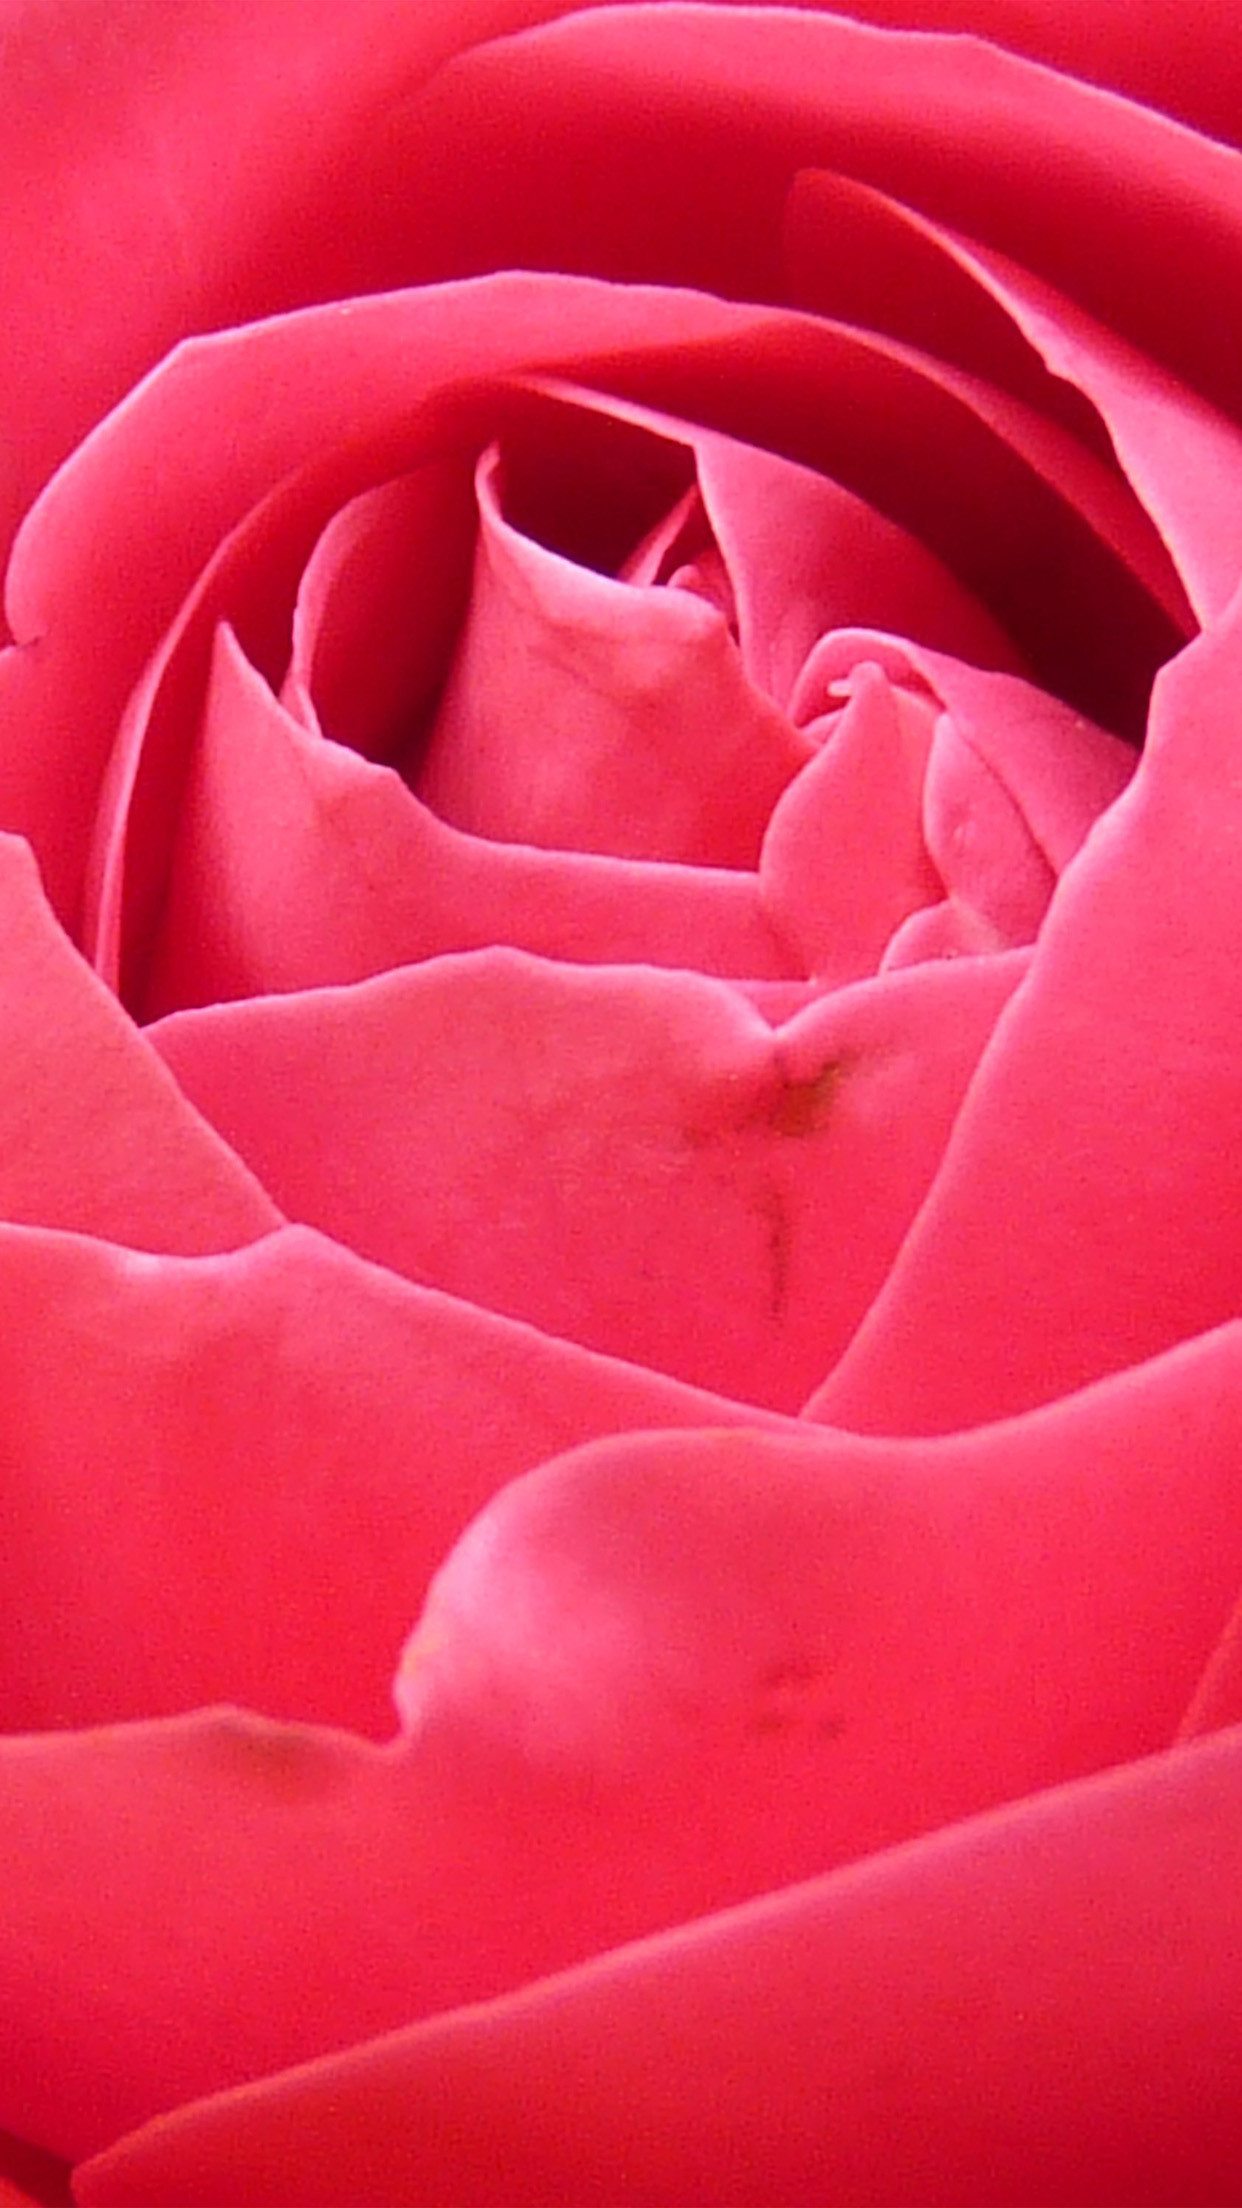 Roses Iphone 6 Wallpapers